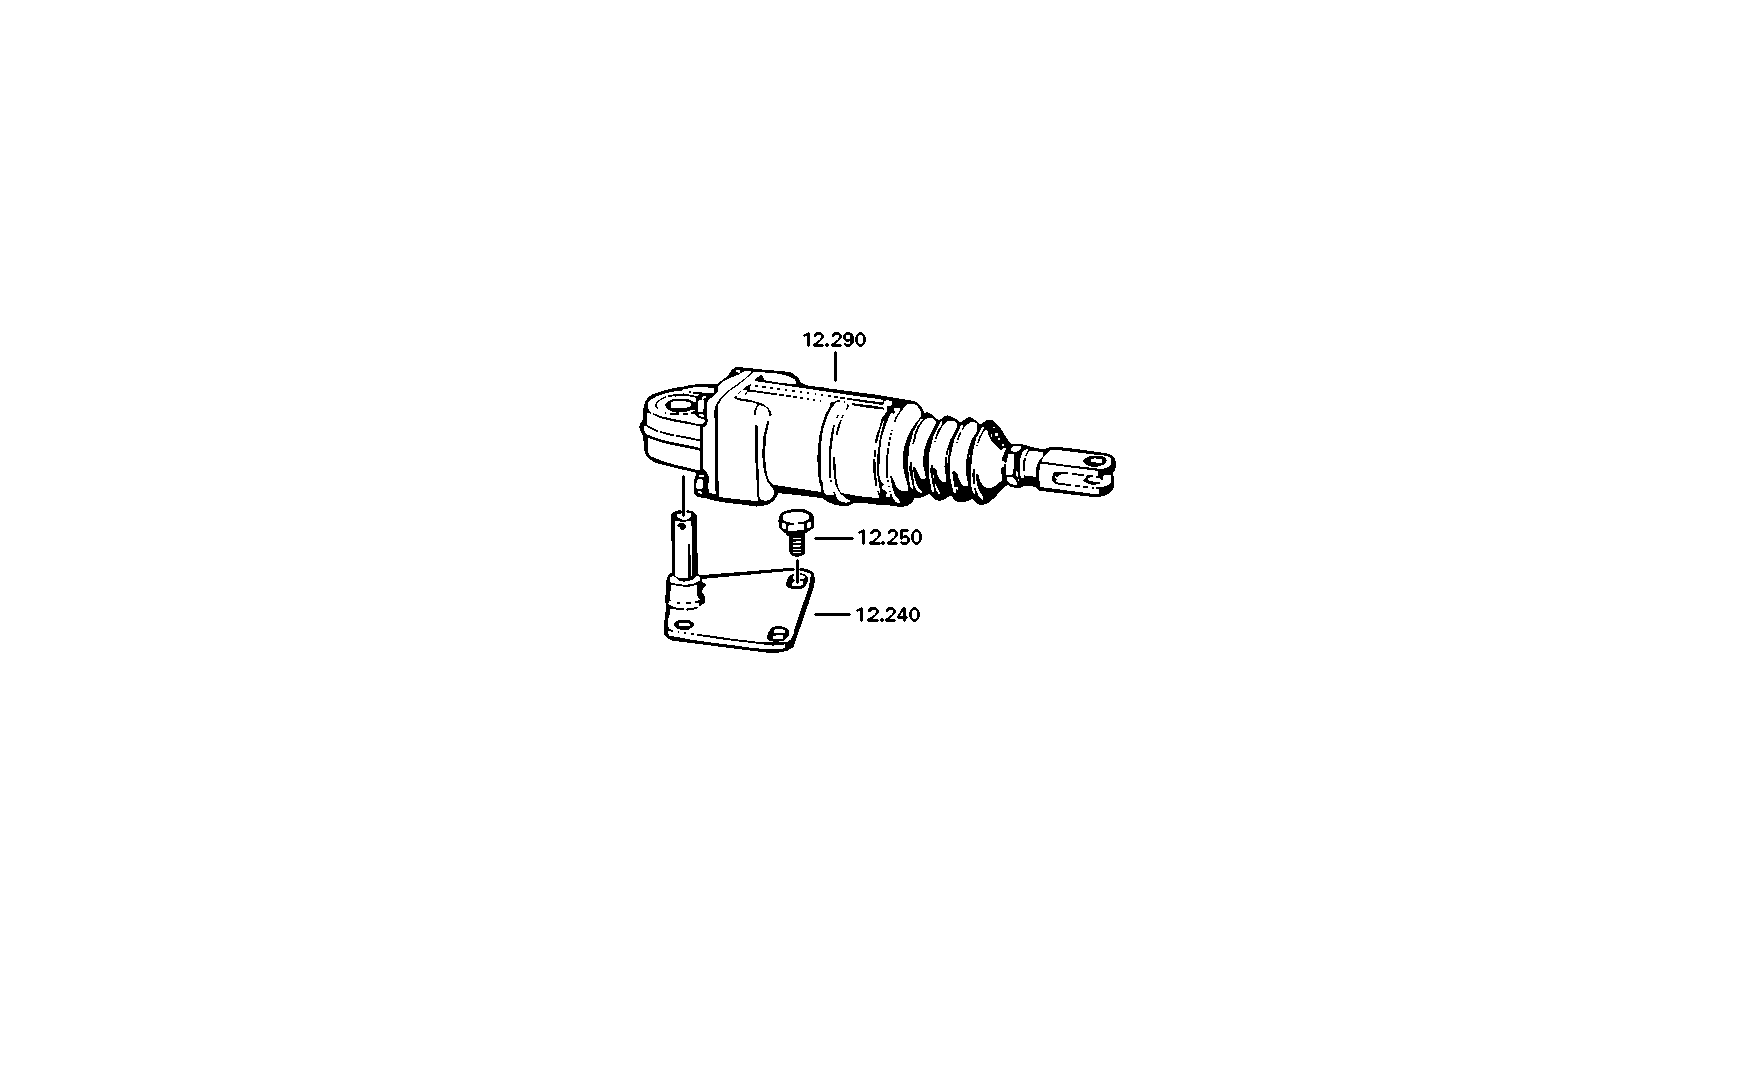 drawing for Astra Veicoli Industriali 114161 - DETENT PLUNGER (figure 1)